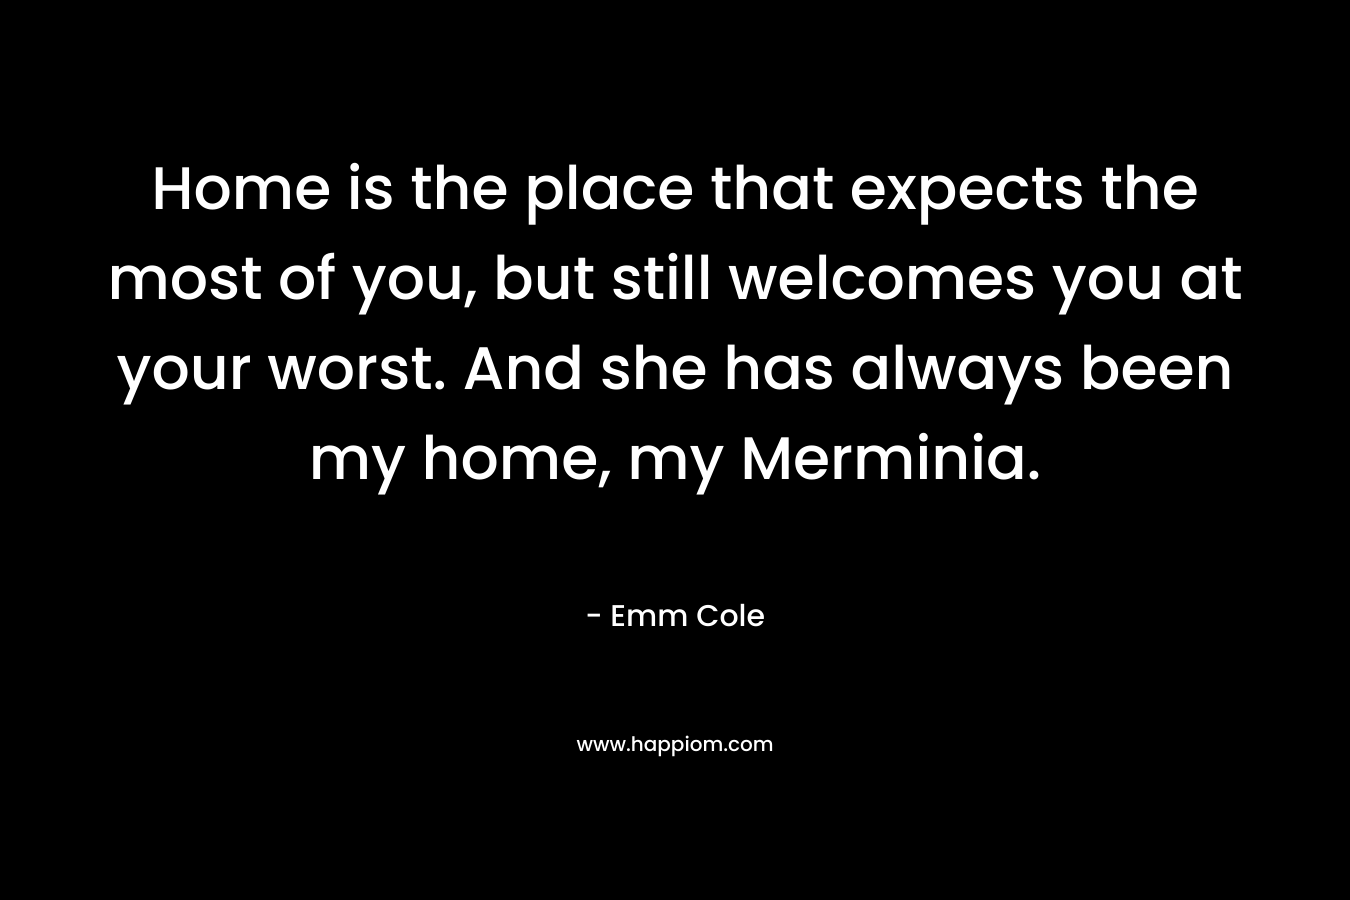 Home is the place that expects the most of you, but still welcomes you at your worst. And she has always been my home, my Merminia. – Emm Cole